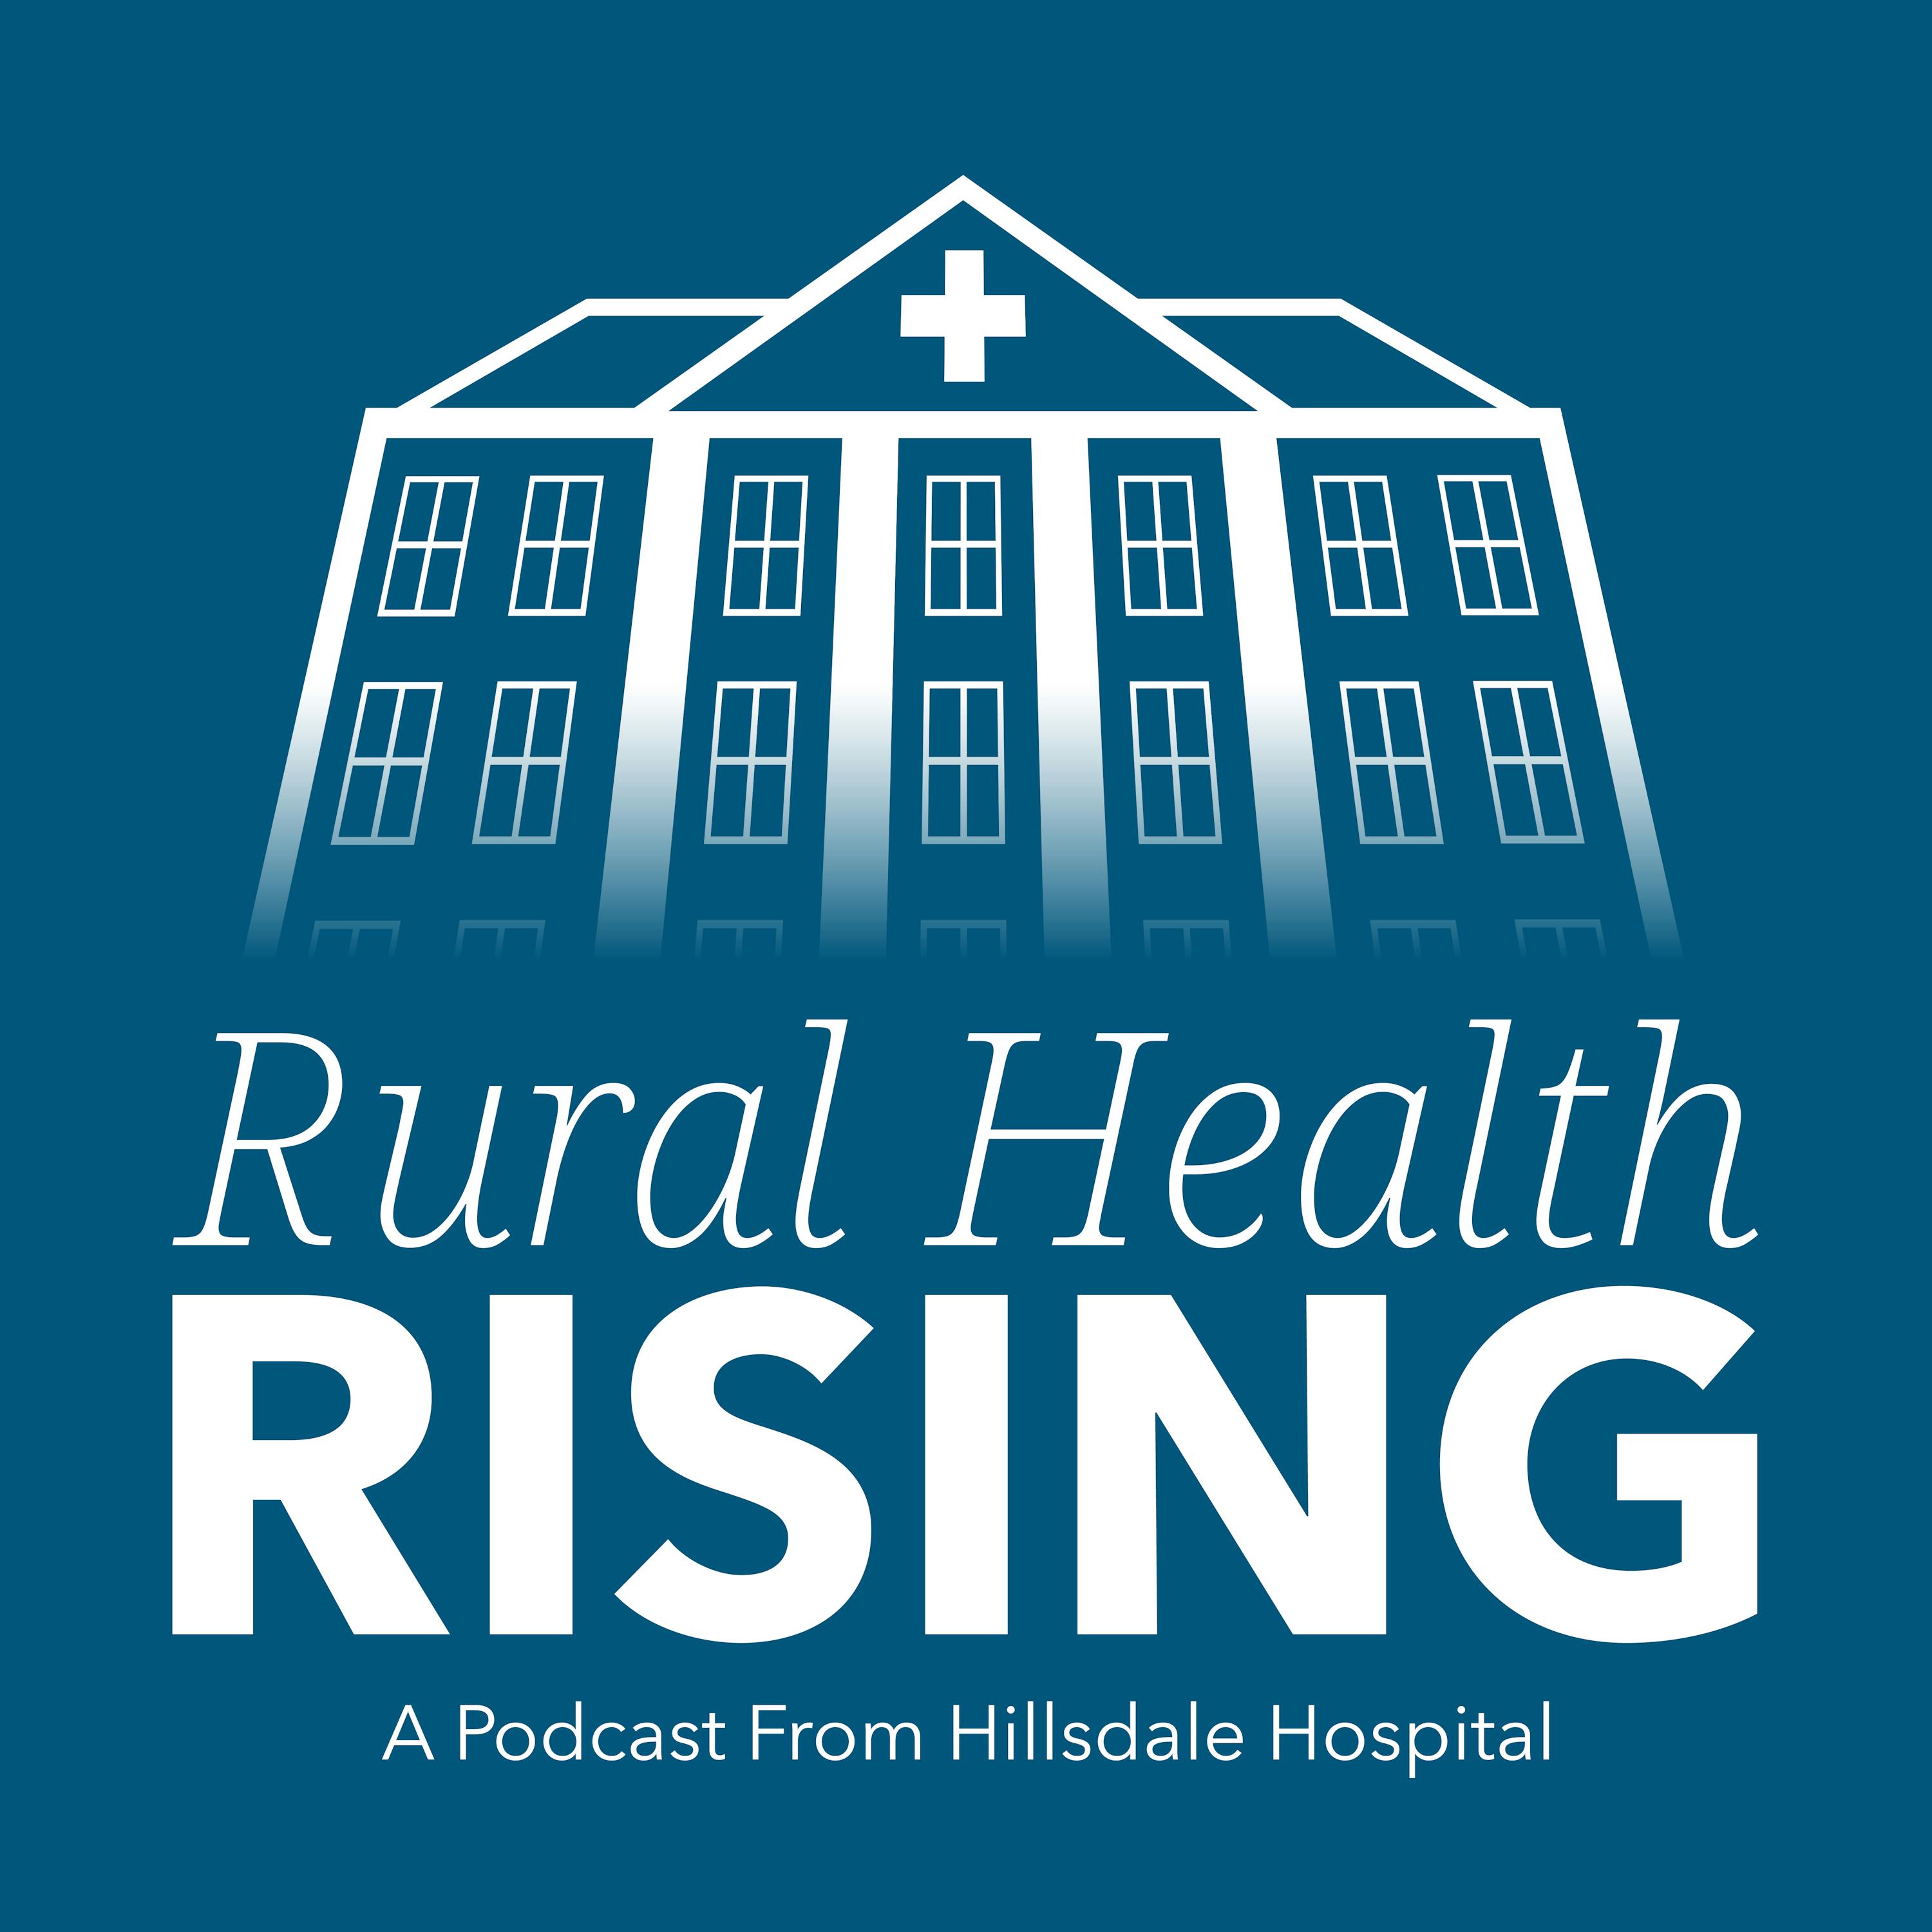 Episode 144: Rural Health Road Trip: The New England States